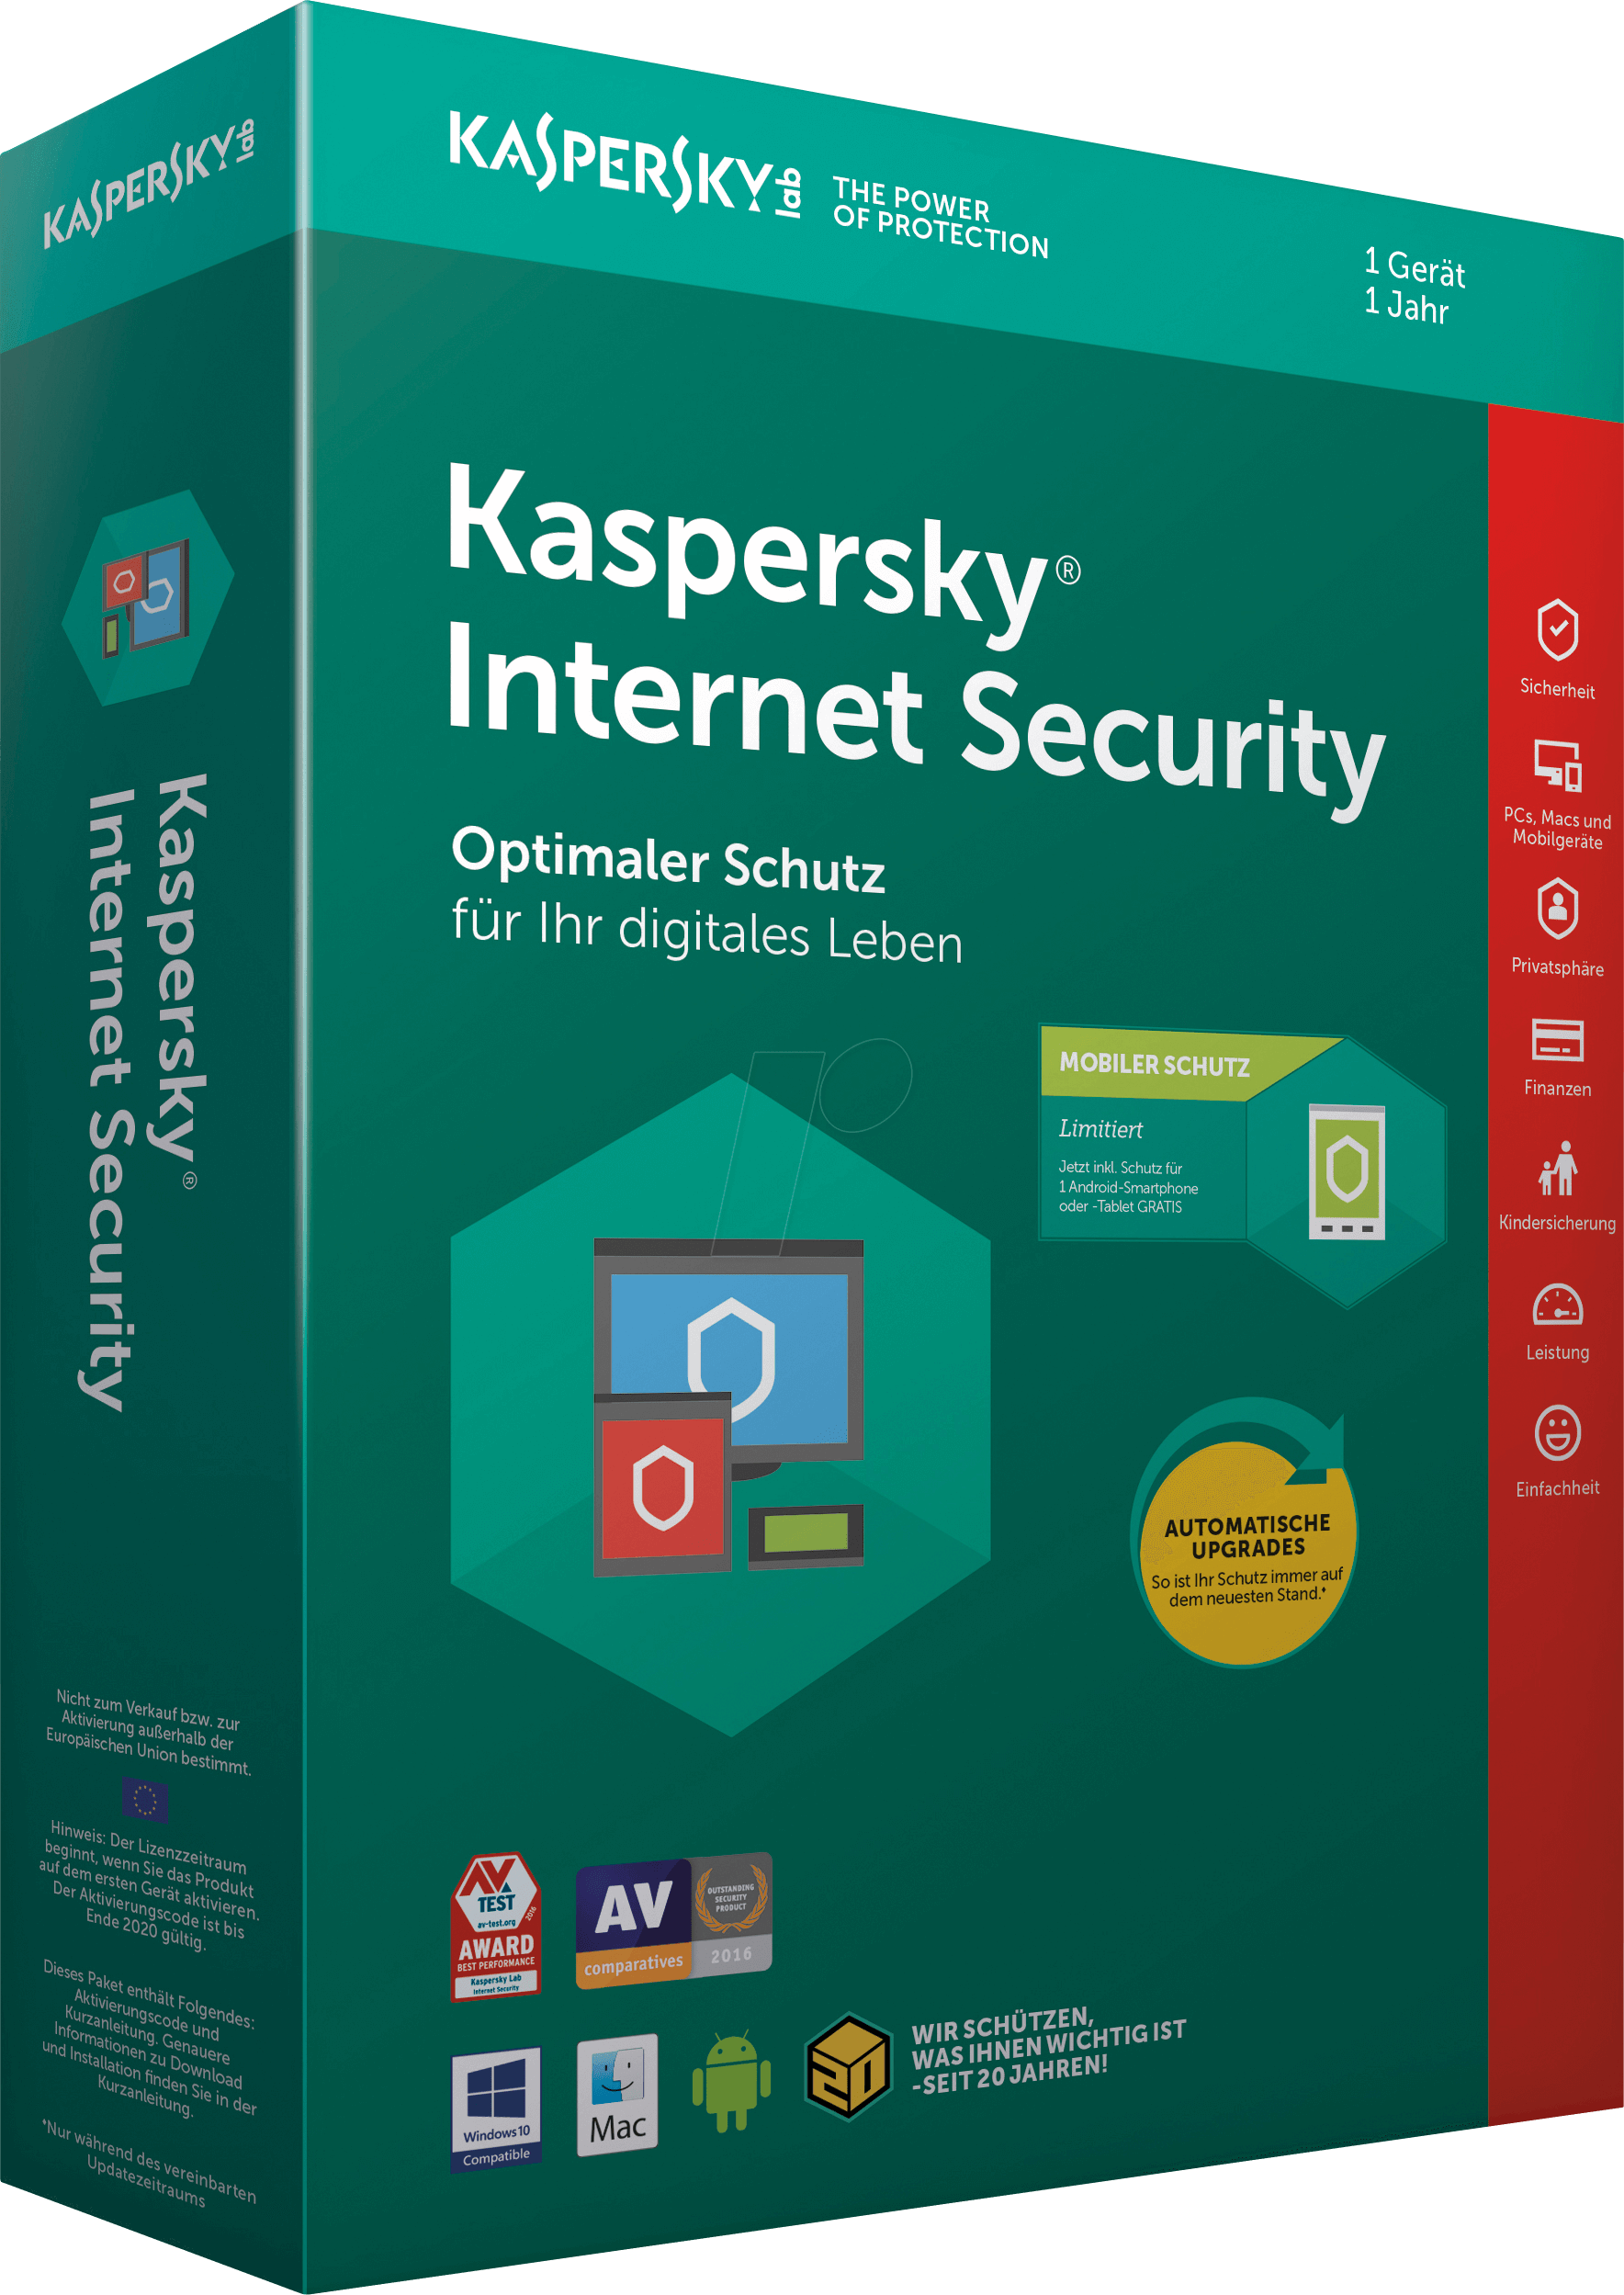 Kaspersky 2018 Logo - KAS IS2018 AND: Kaspersky Internet Security 2018 + Android Sec. at ...